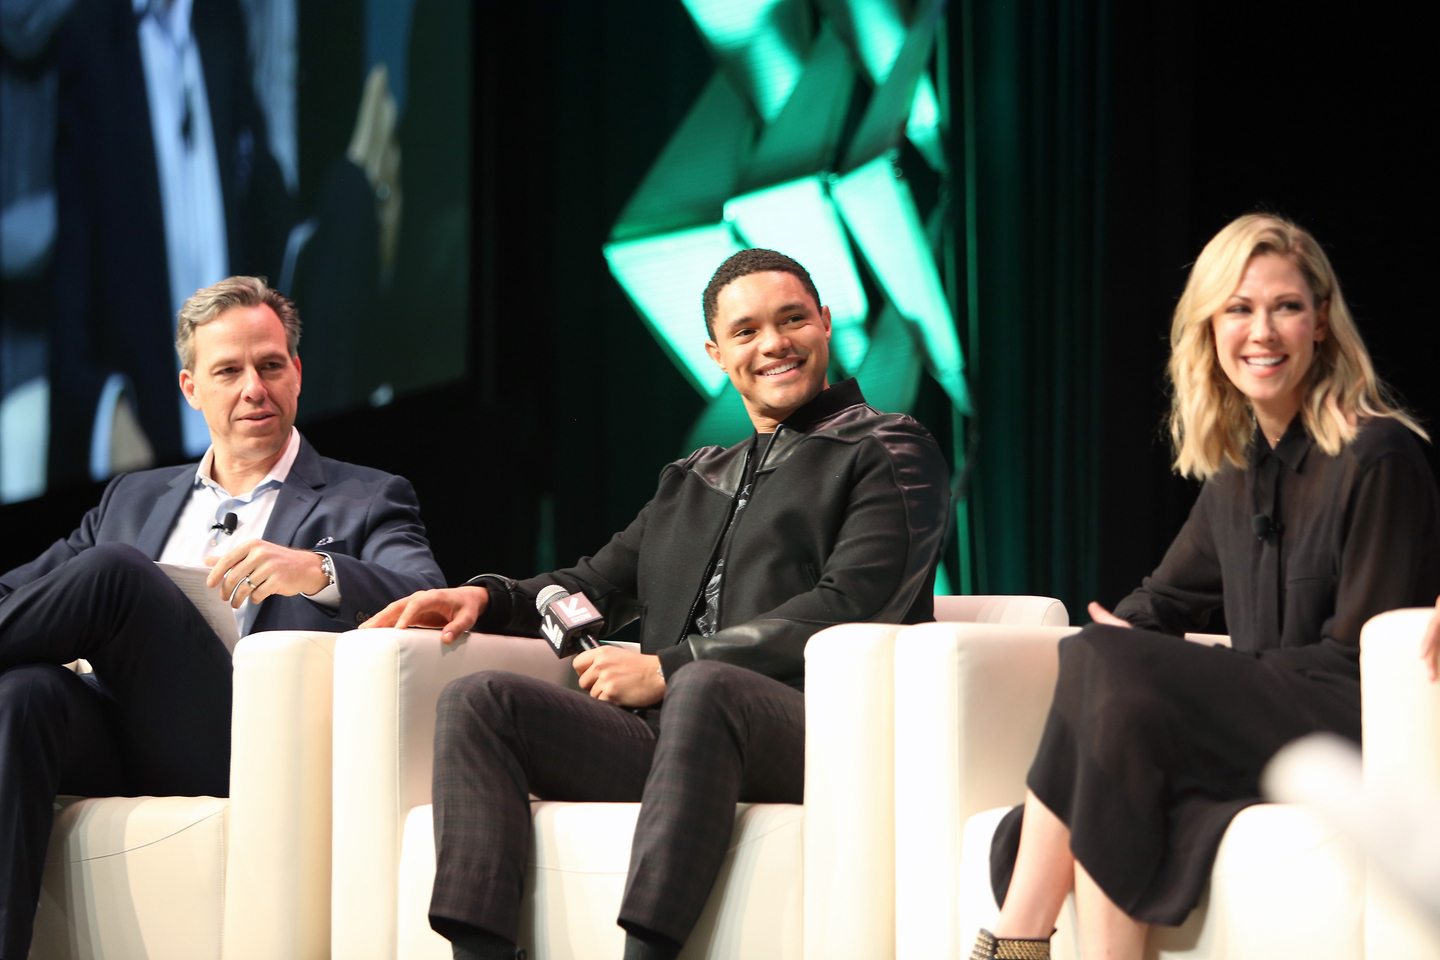 Jake Tapper, Trevor Noah, and Desi Lydic at their Featured Session - Photo by Travis P Ball/Getty Images for SXSW